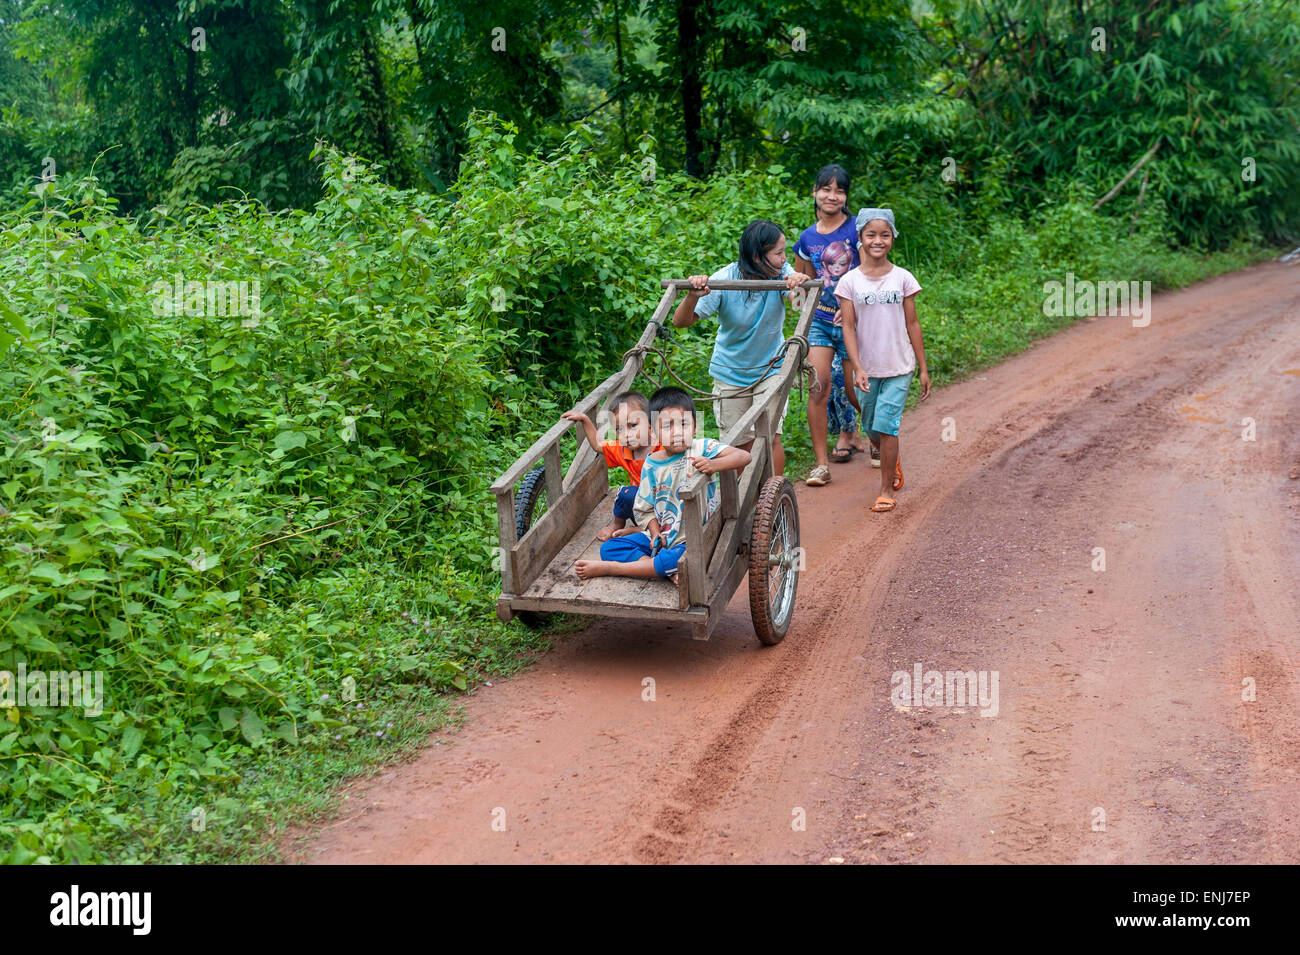 Thai children pushing a cart with younger kids inside. Thailand Stock Photo